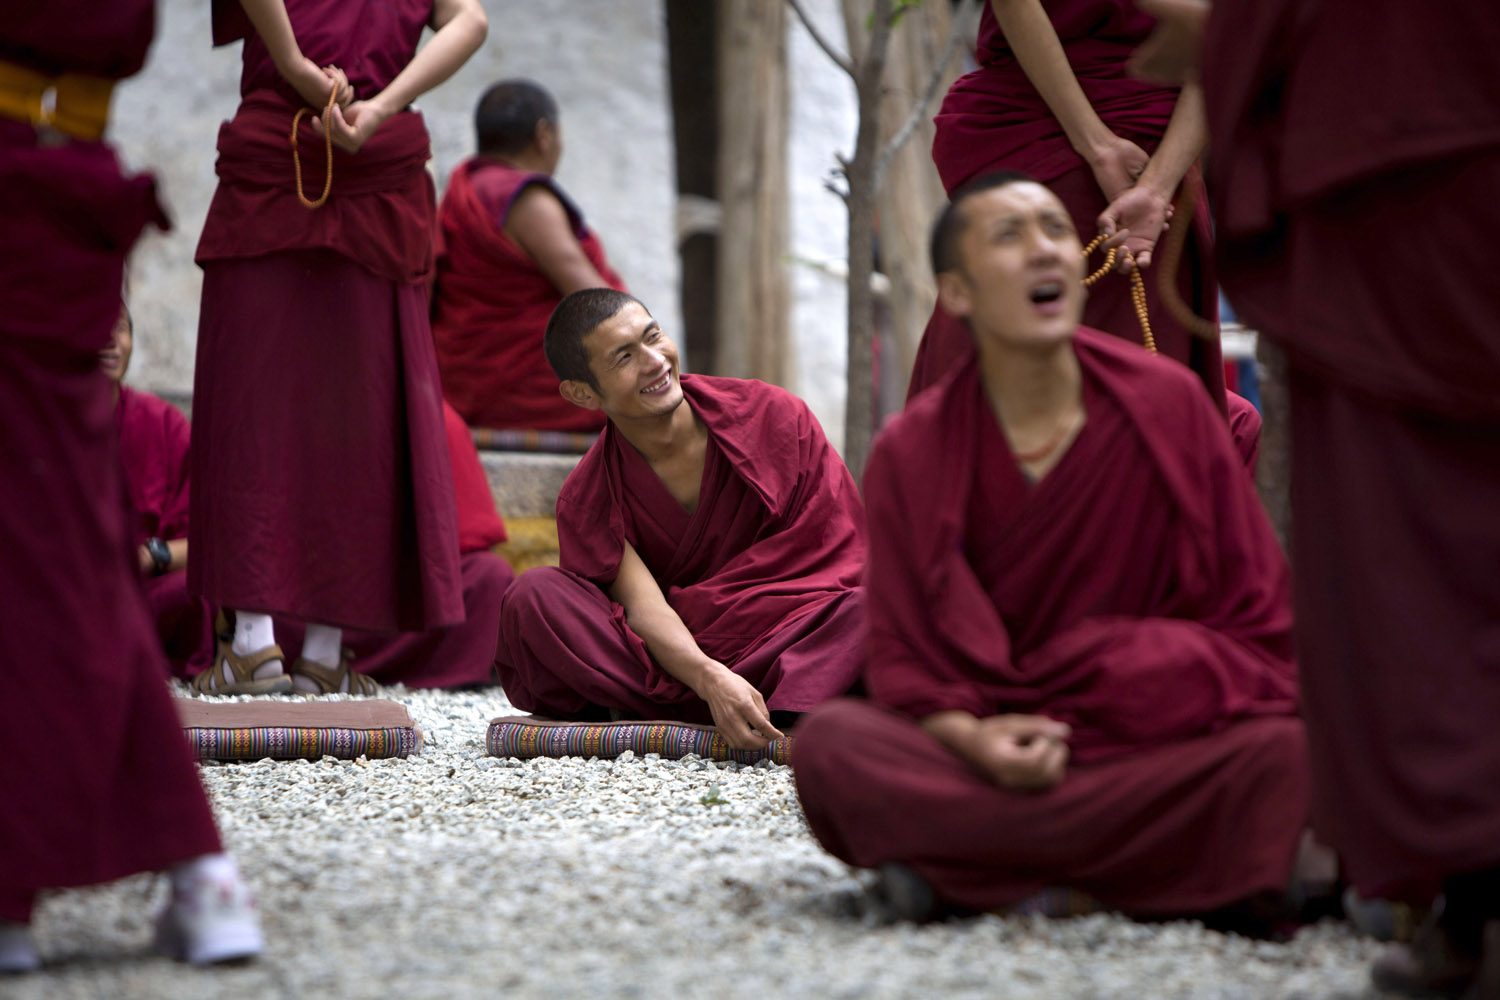 Aug. 20, 2012. Tibetan Buddhist monks debate Buddhist related issues in the courtyard of the Sera Monastery on in Lhasa, Tibet.